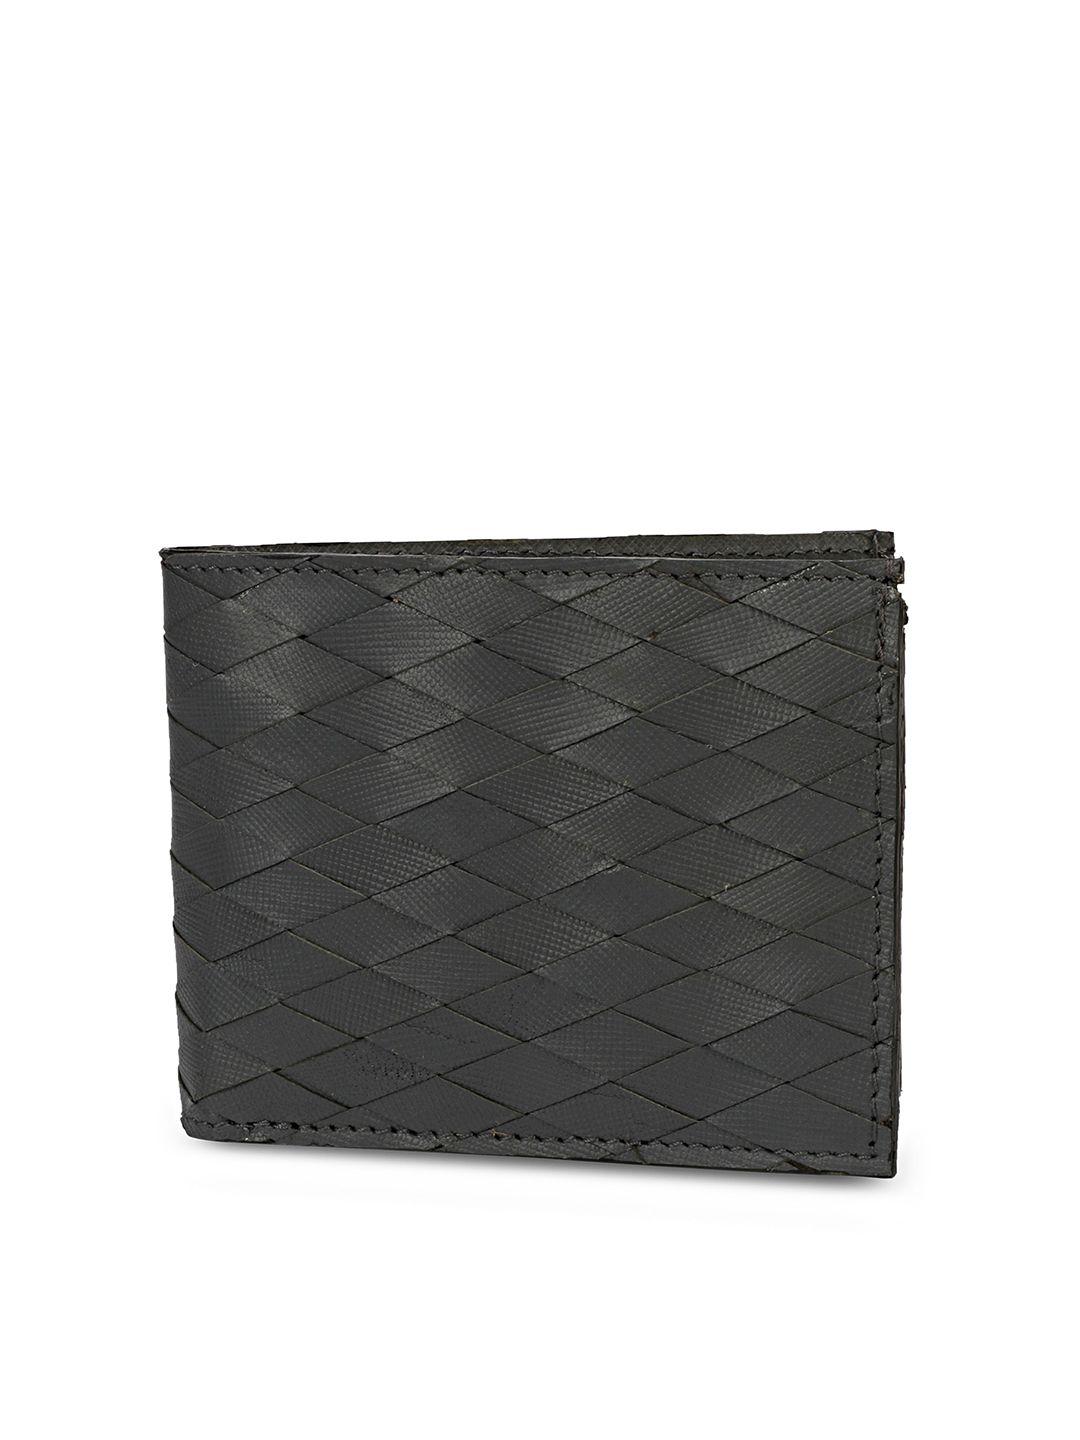 perked men checked textured leather two fold wallet